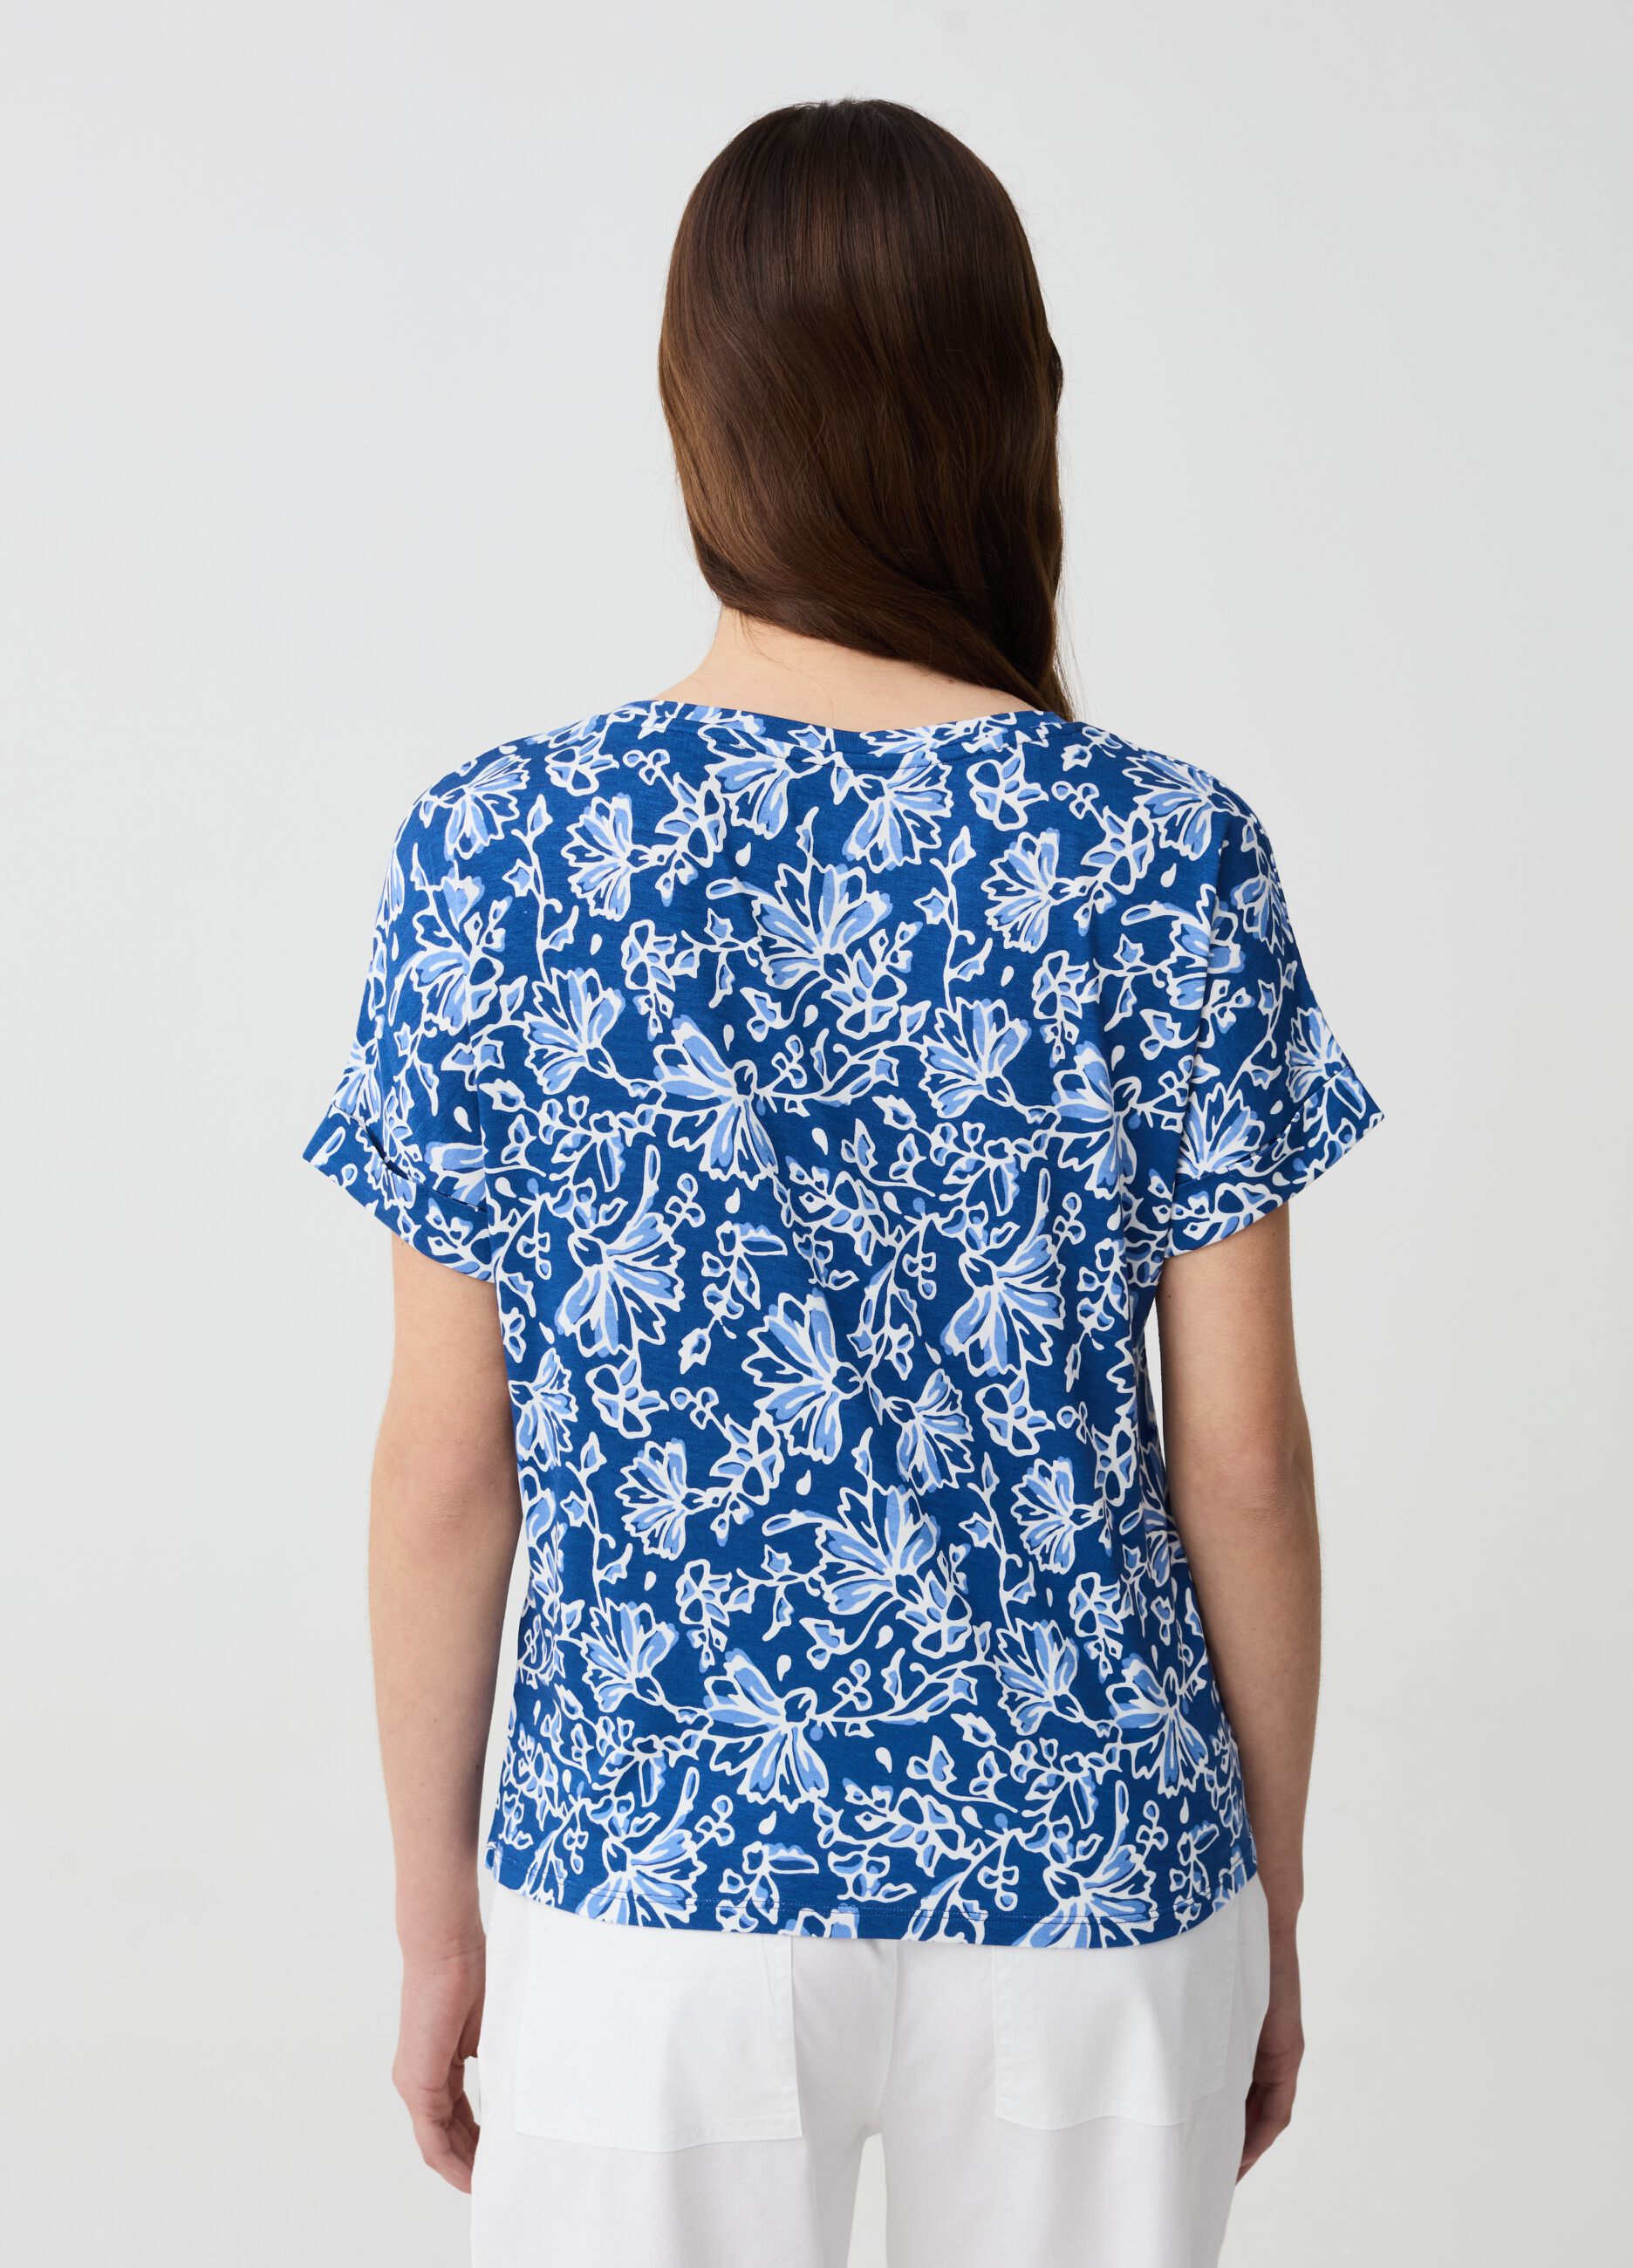 Floral T-shirt with kimono sleeves